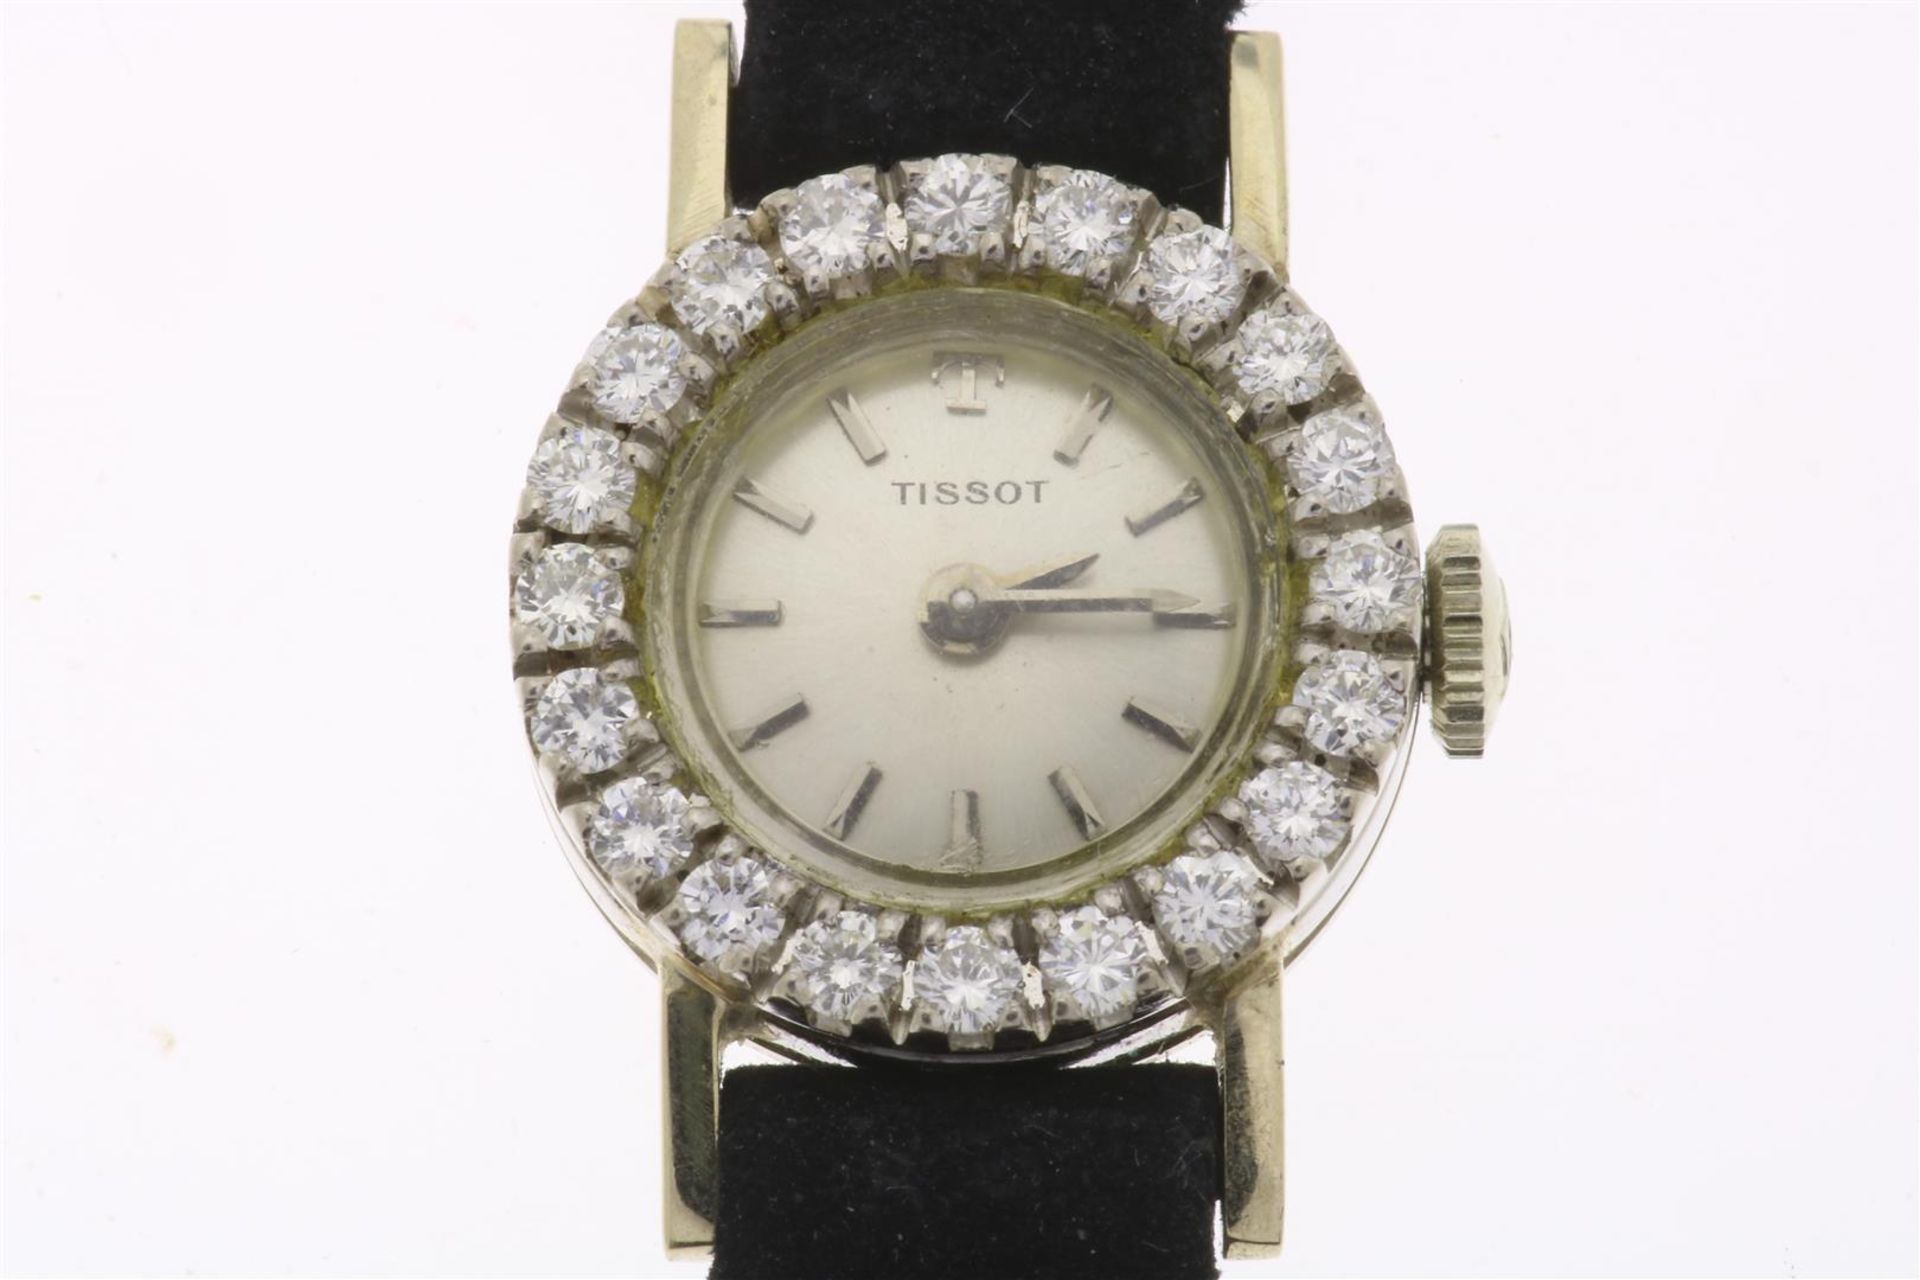 White gold women's wristwatch on a velvet leather strap, case set with brilliant-cut diamonds, - Image 2 of 2